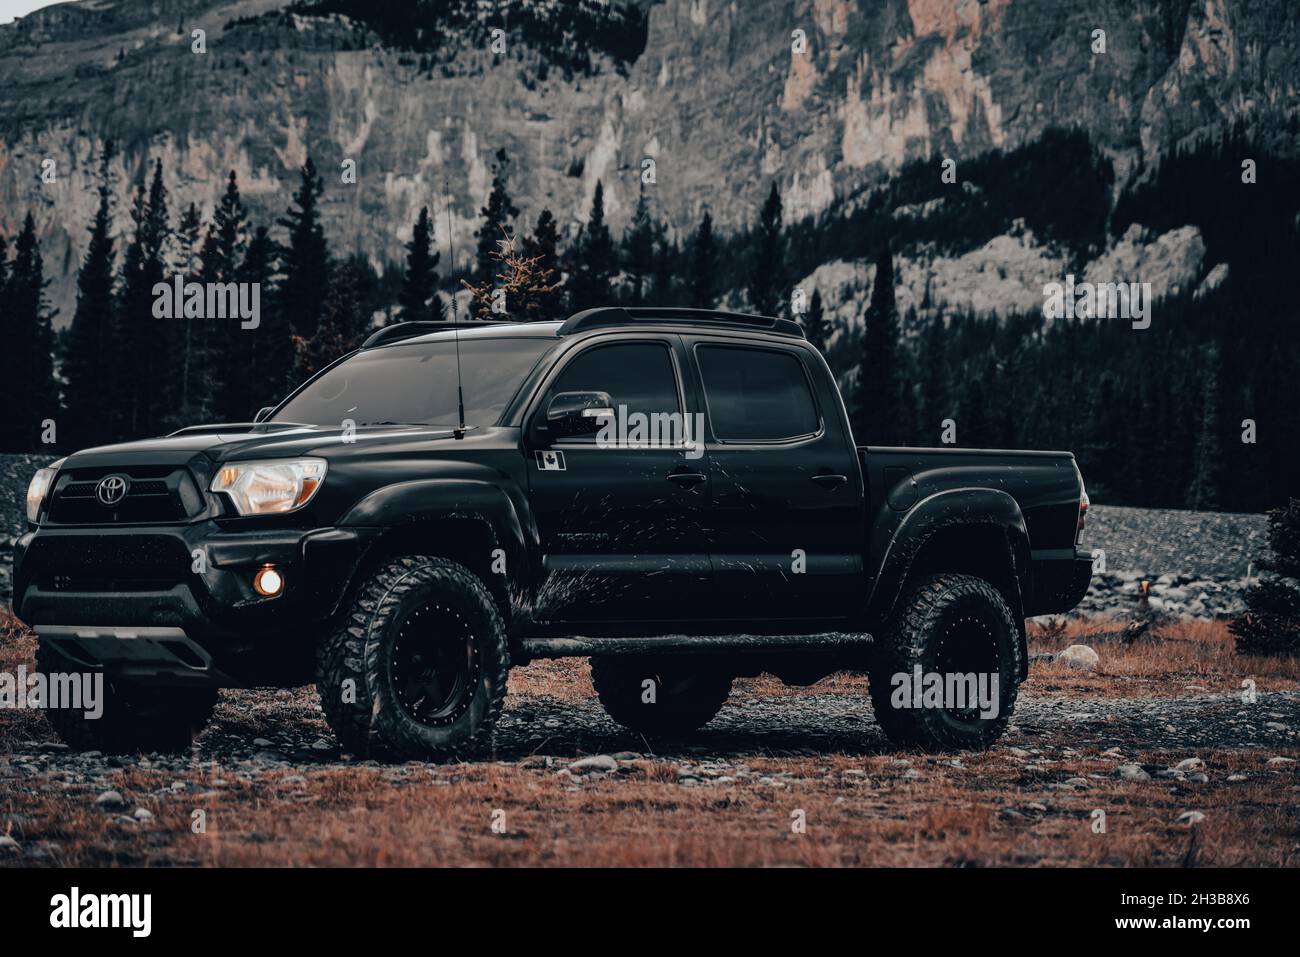 WAIPRUS, CANADA - Oct 25, 2021: Black Toyota Tacoma with mountains and forestry in the background. Stock Photo